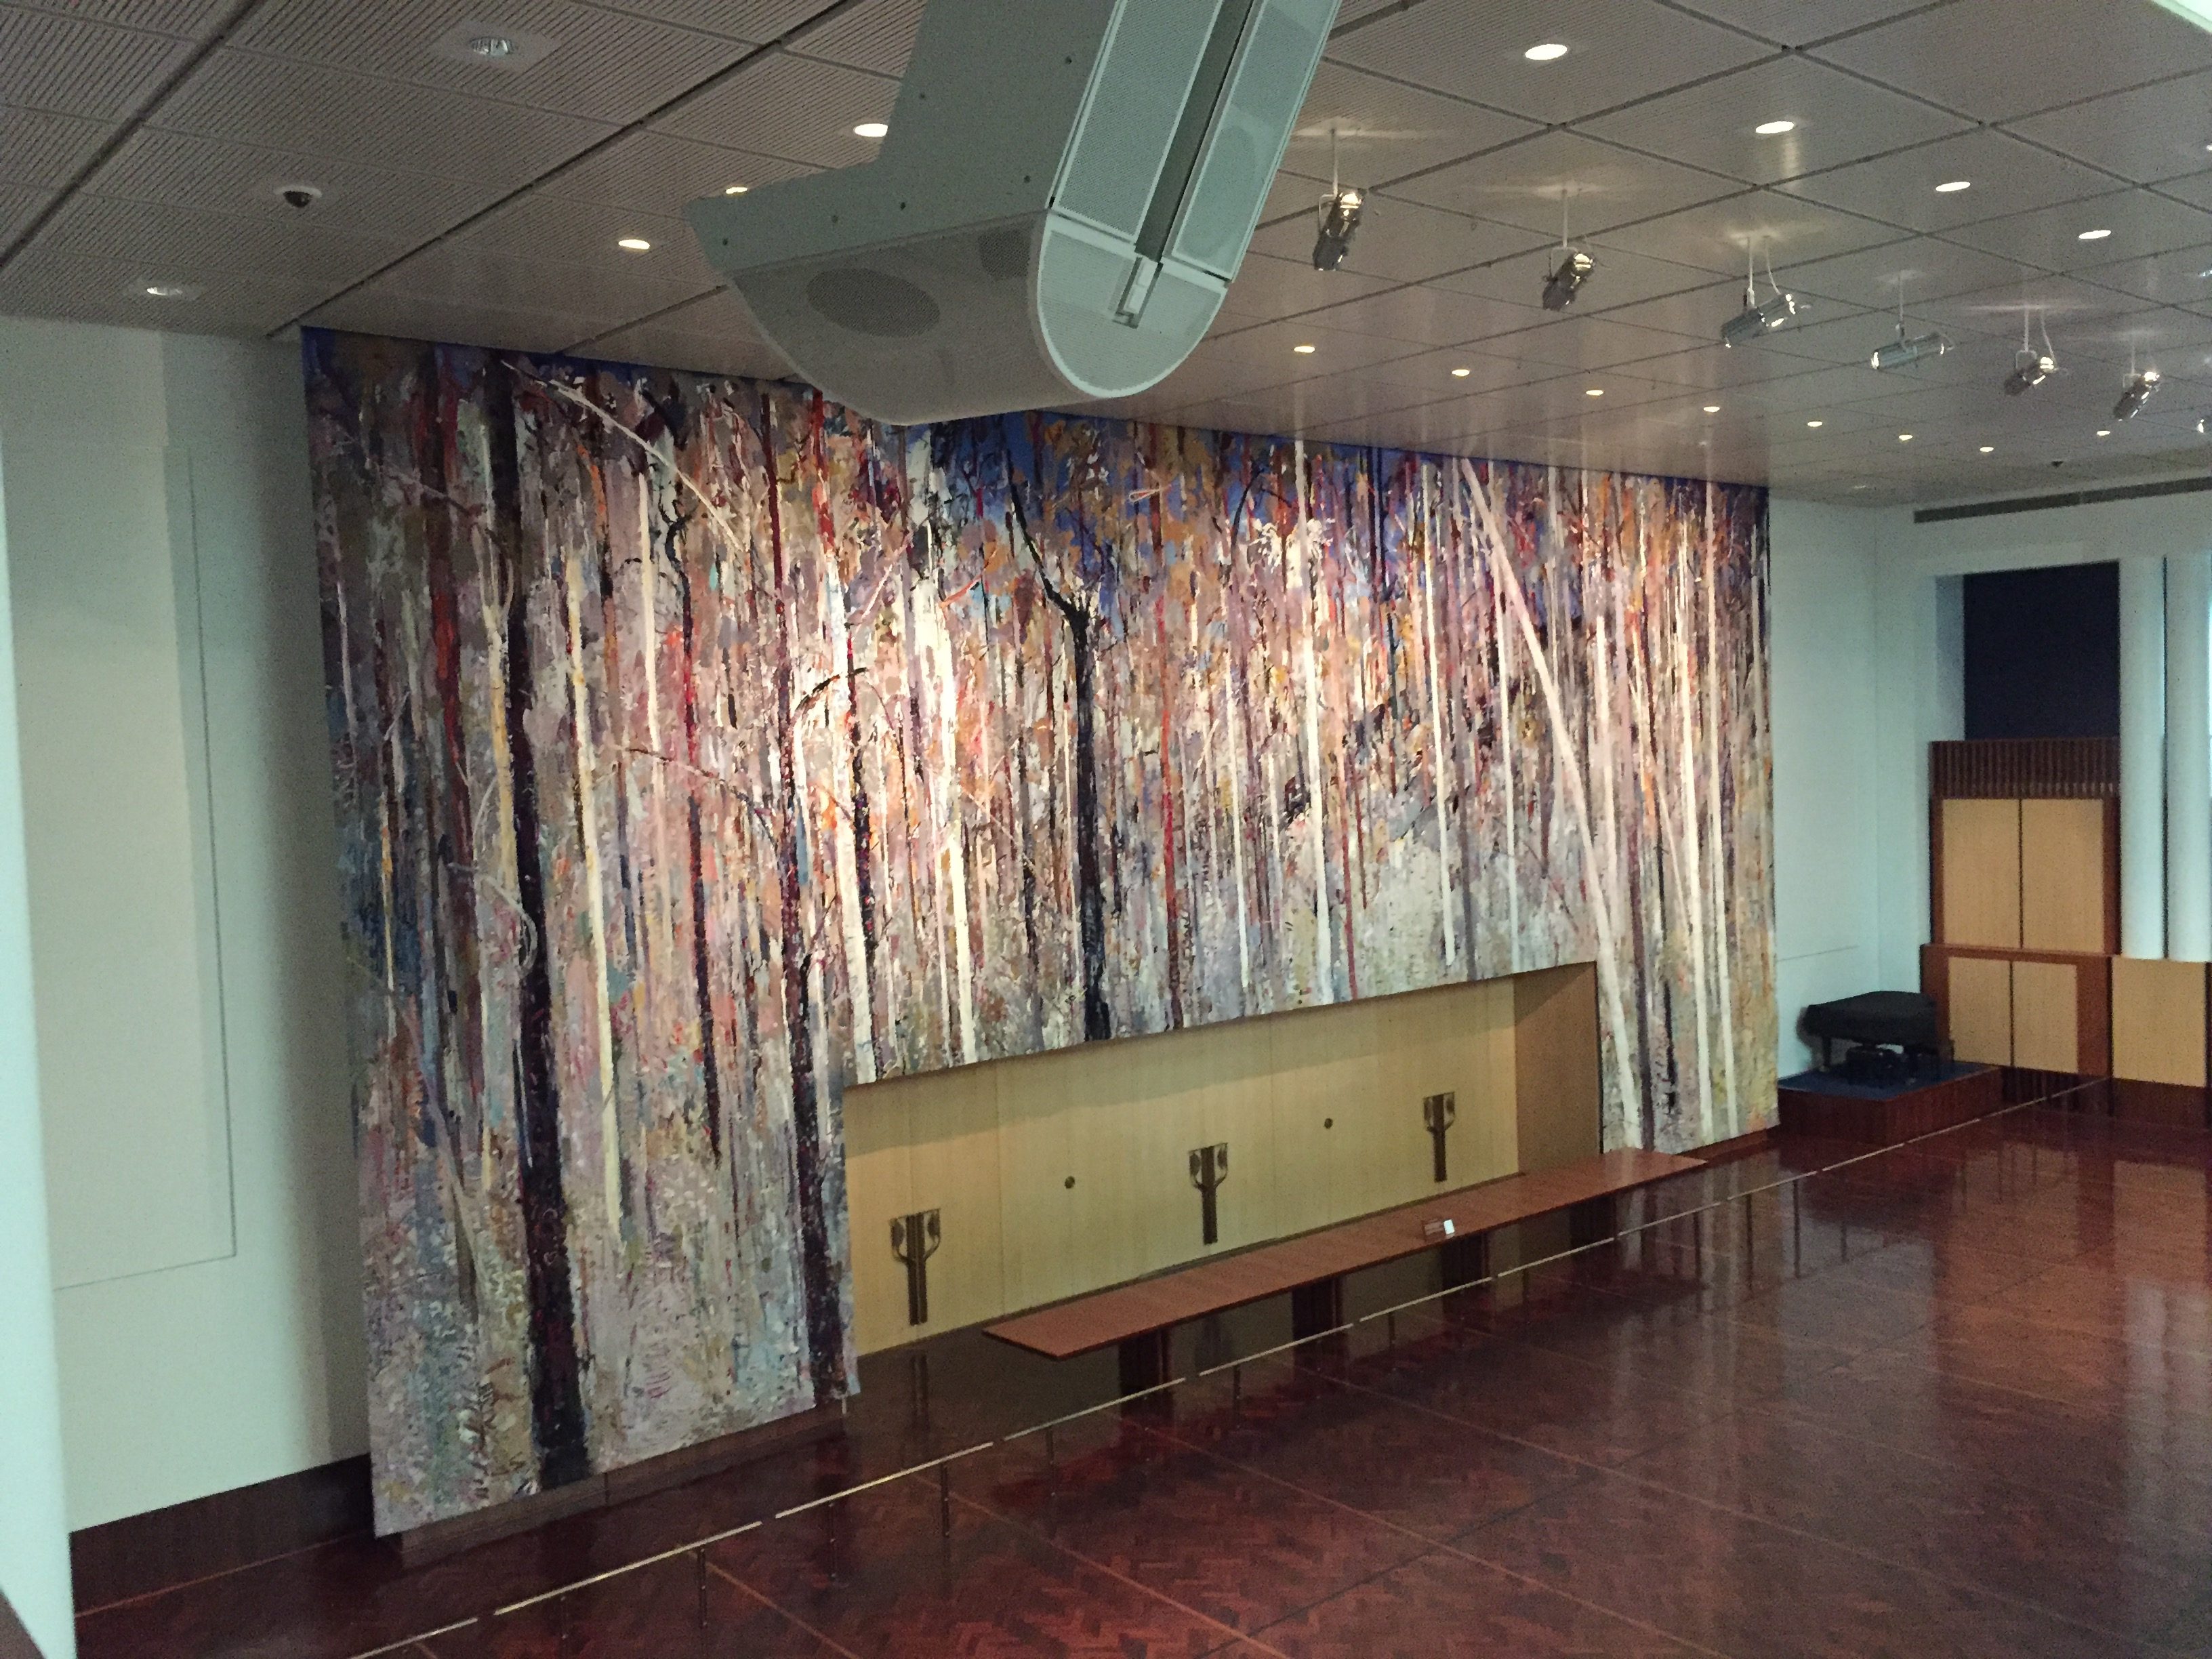 giant tapestry in the Great Hall of the new Parliament House based on a painting by Arthur Boyd